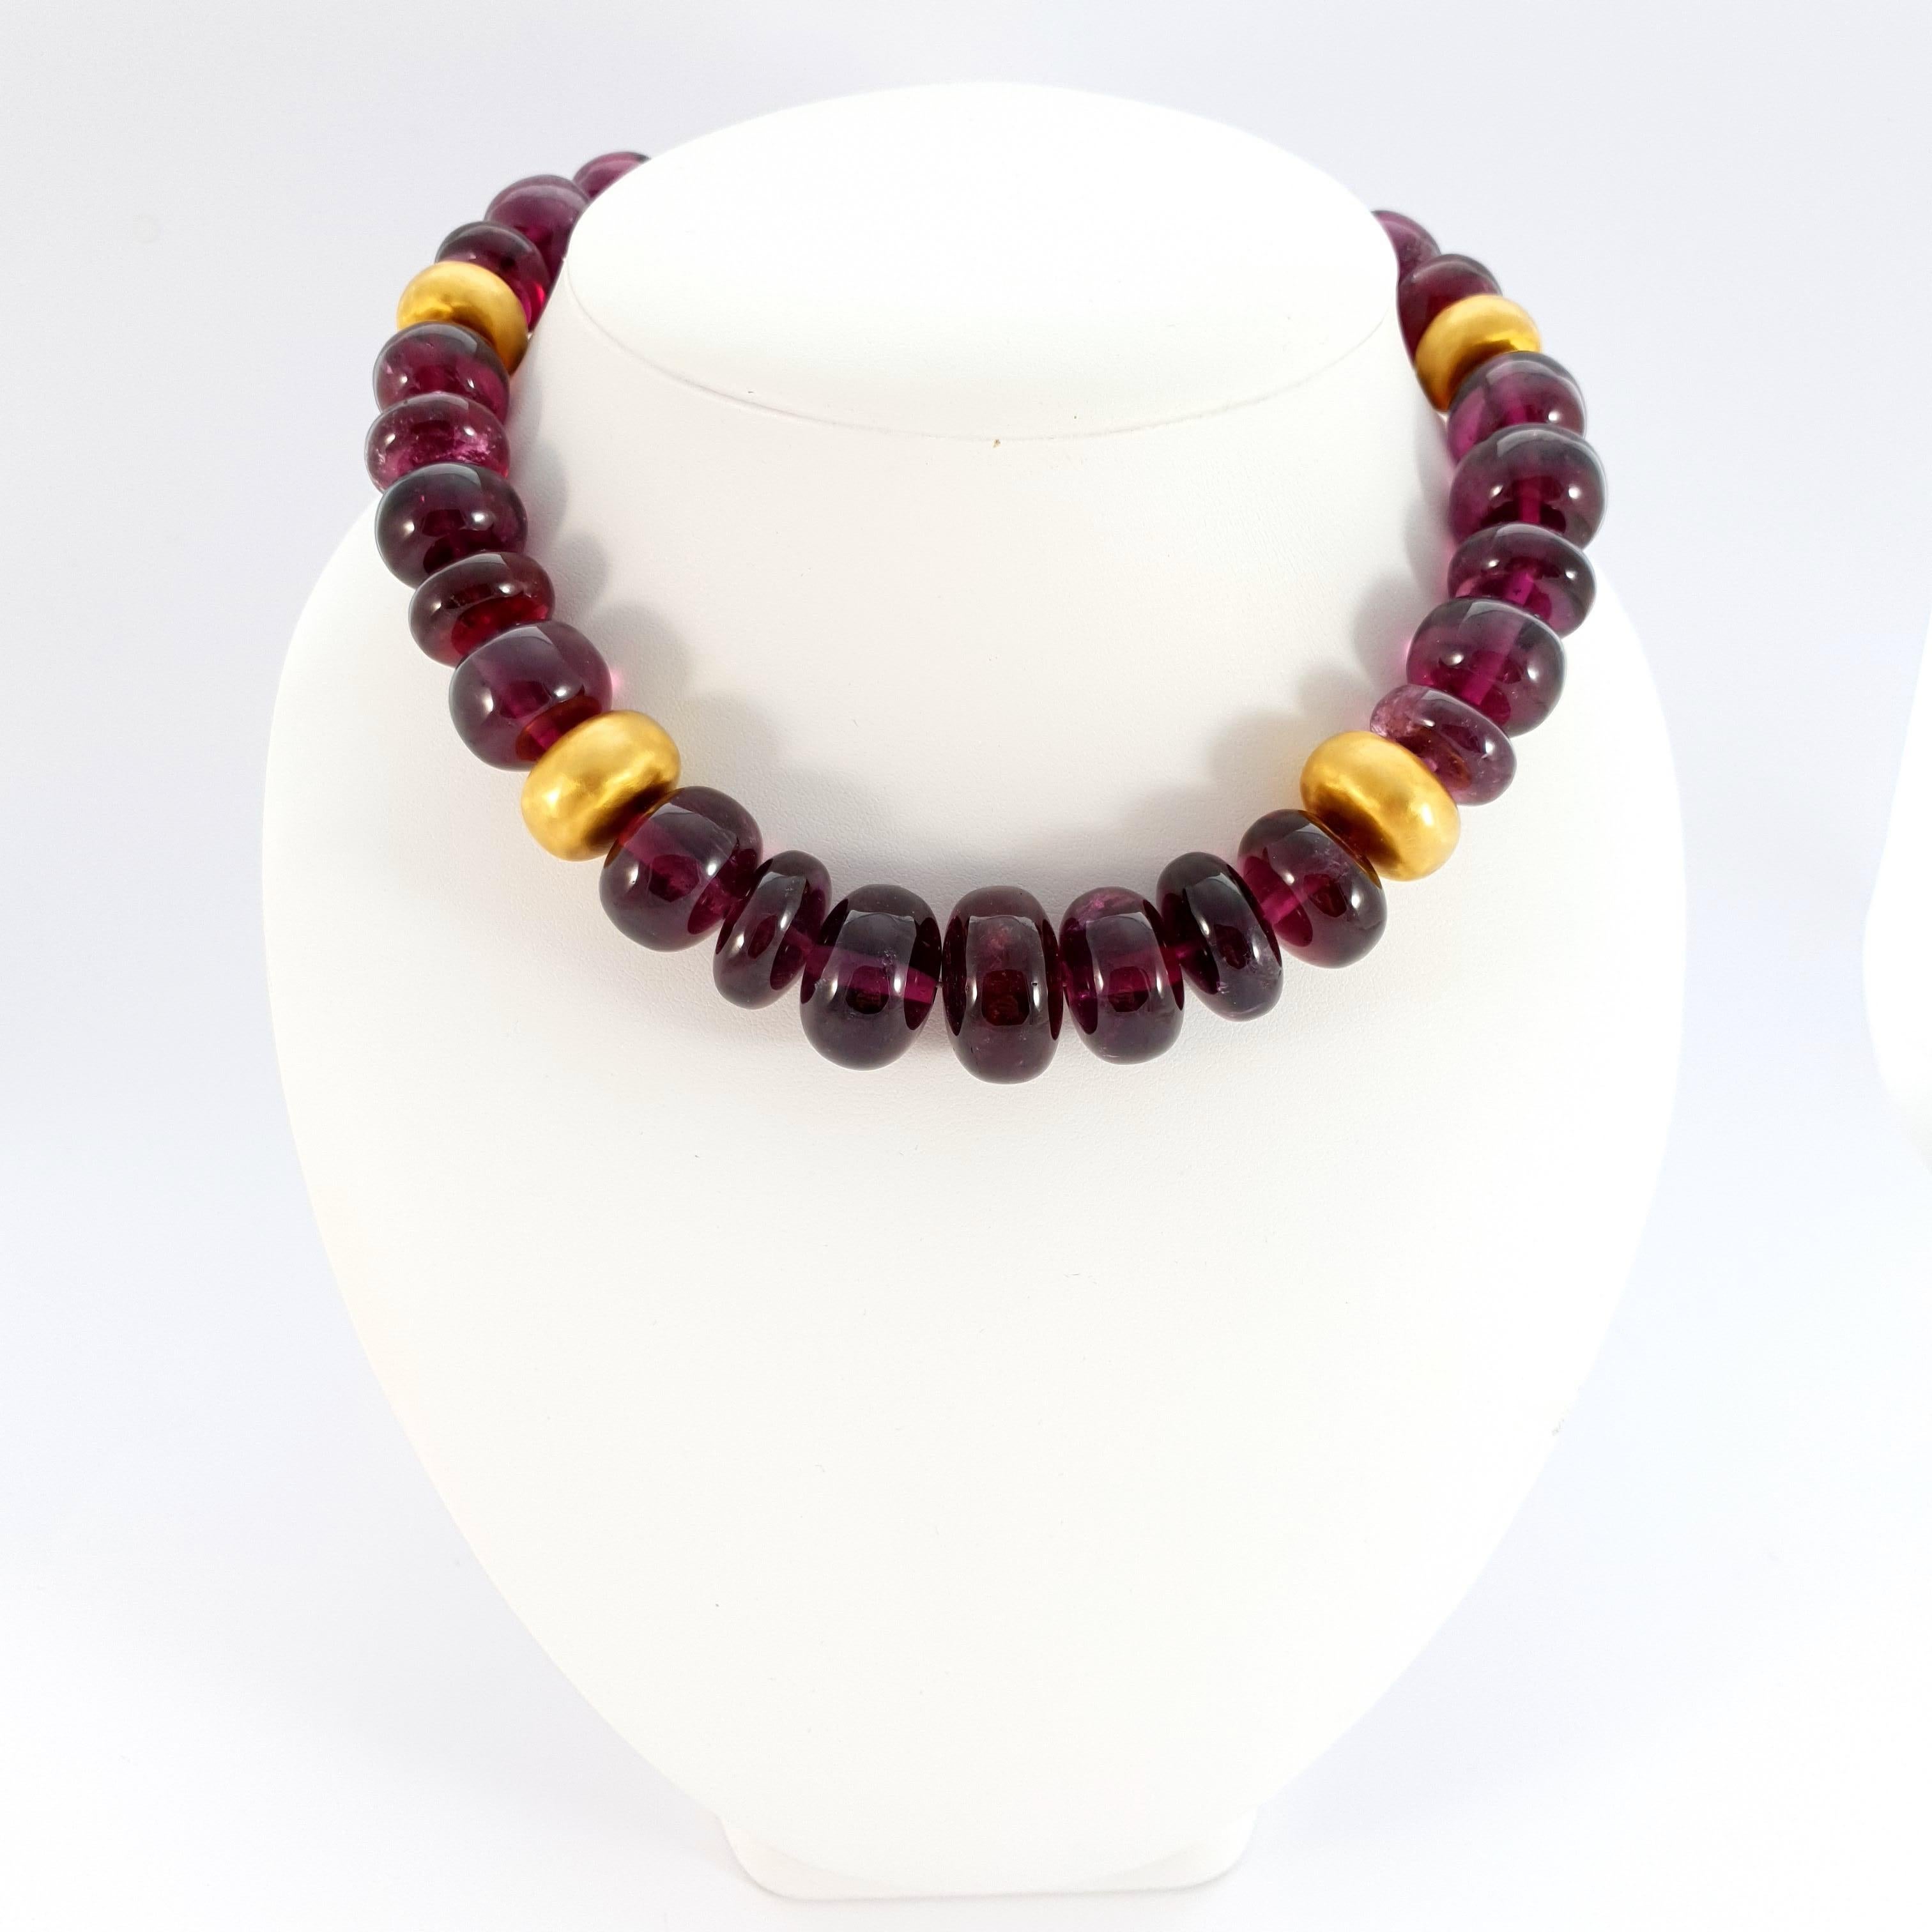 Big Purple Rubelite Tourmaline Rondel Beaded Necklace with 18 Carat Yellow Gold For Sale 1